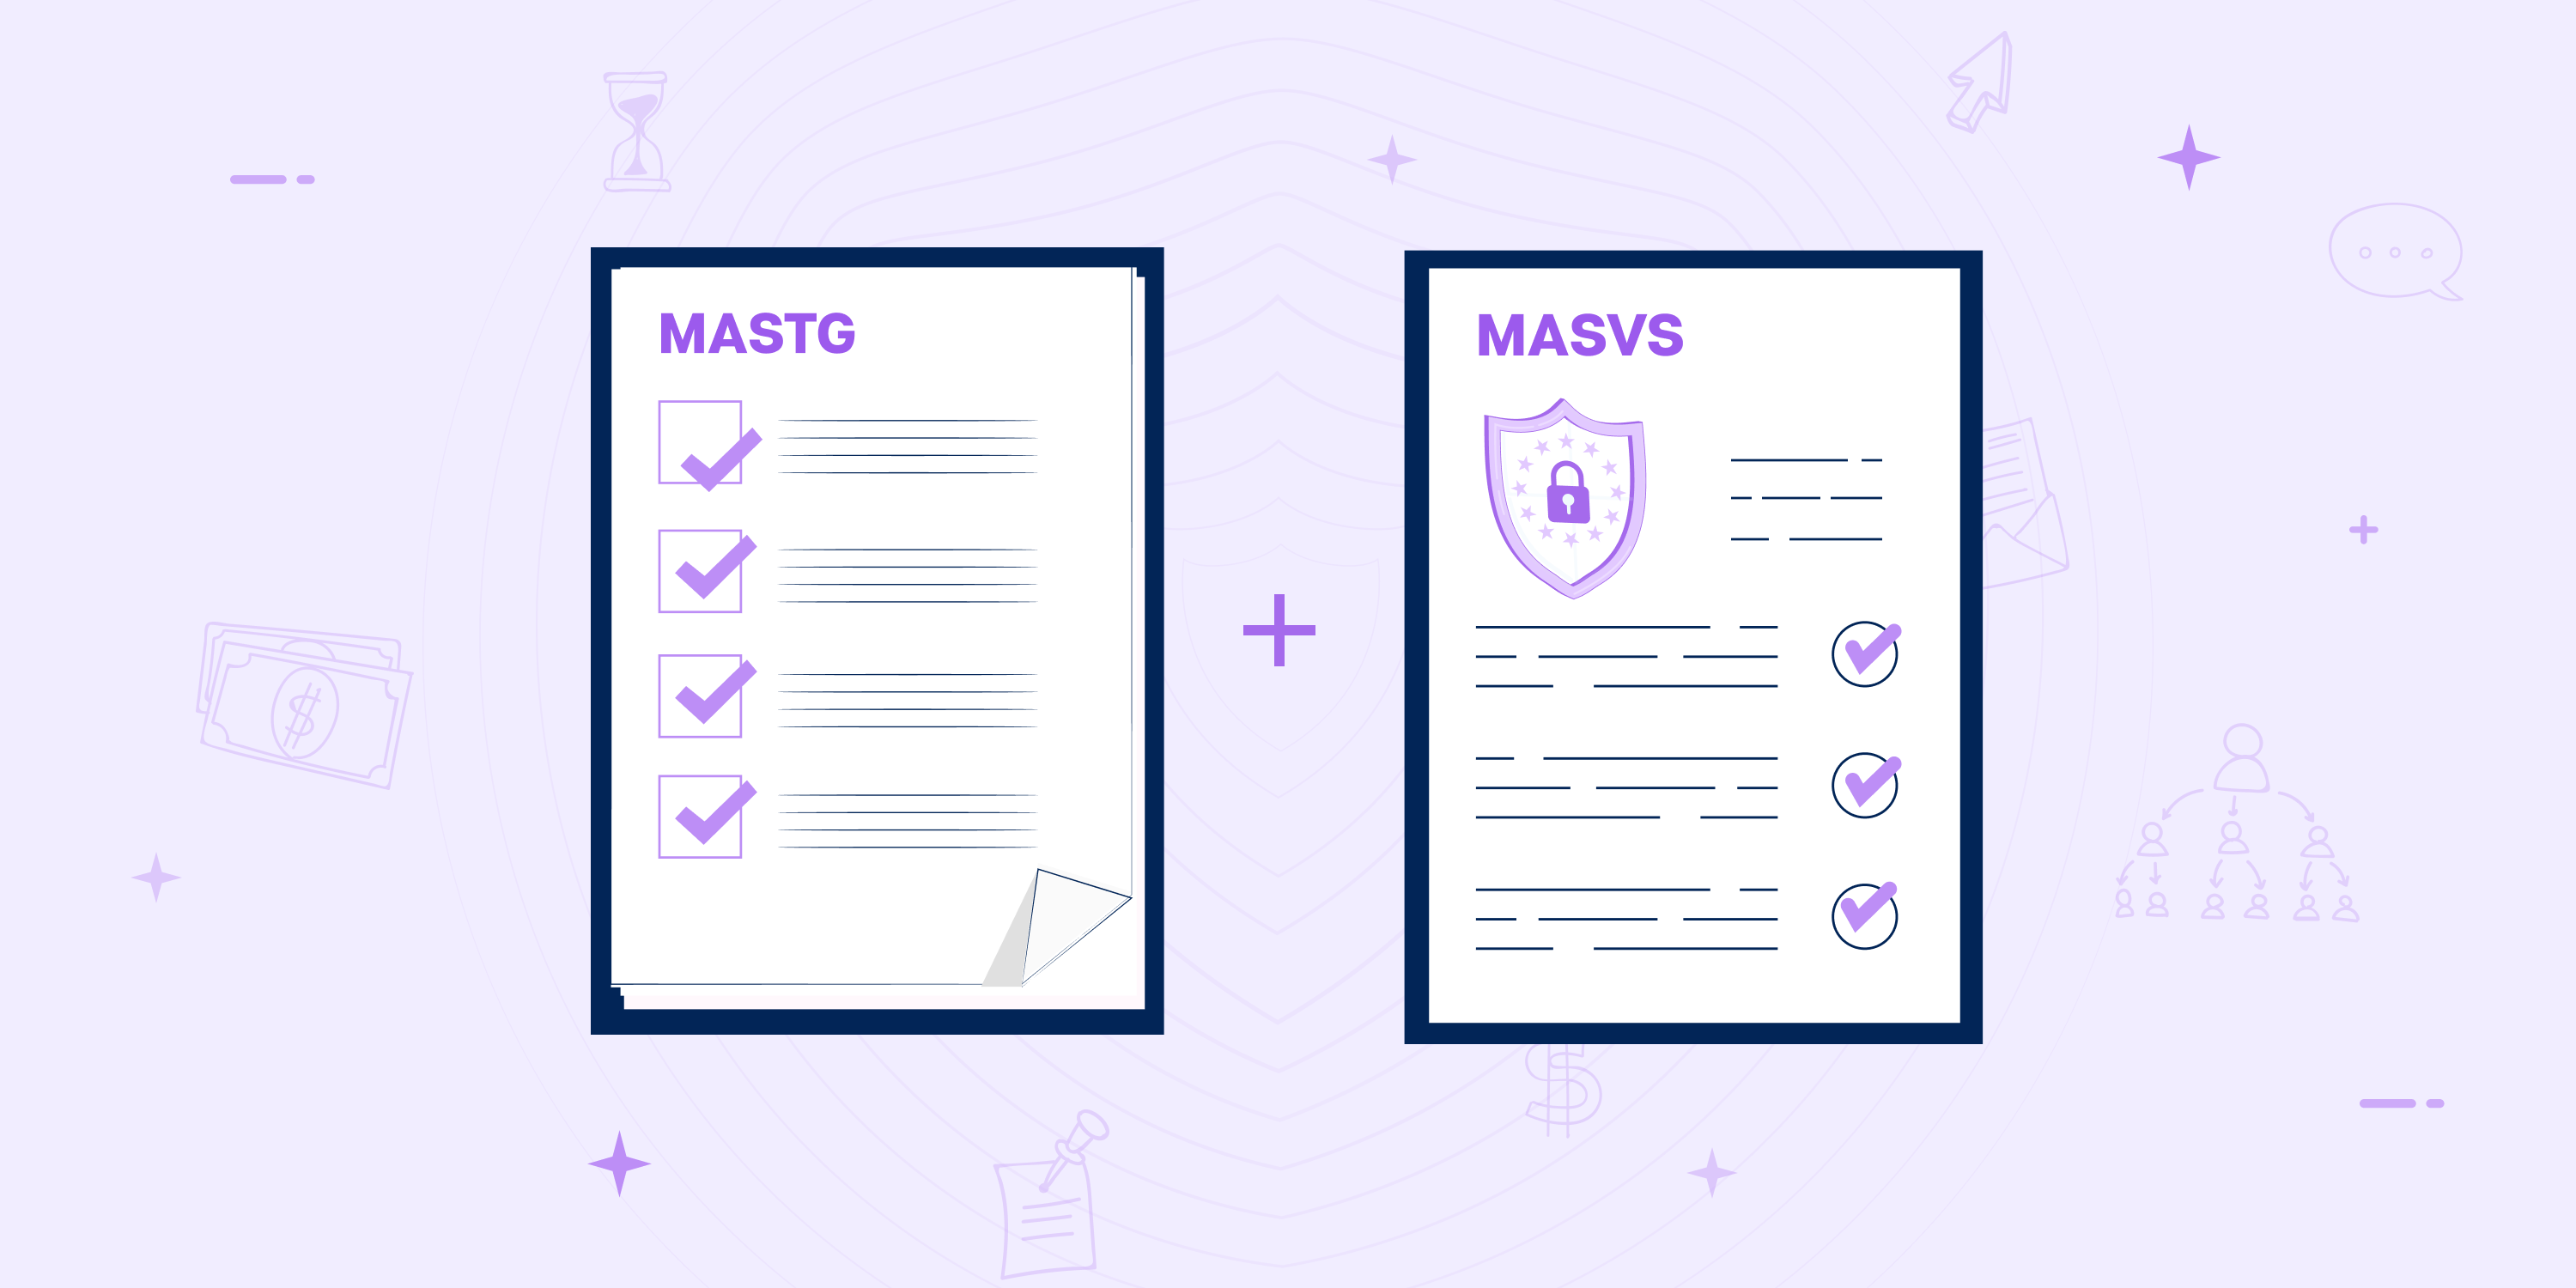 How can OWASP MASTG and OWASP MASVS secure mobile applications?